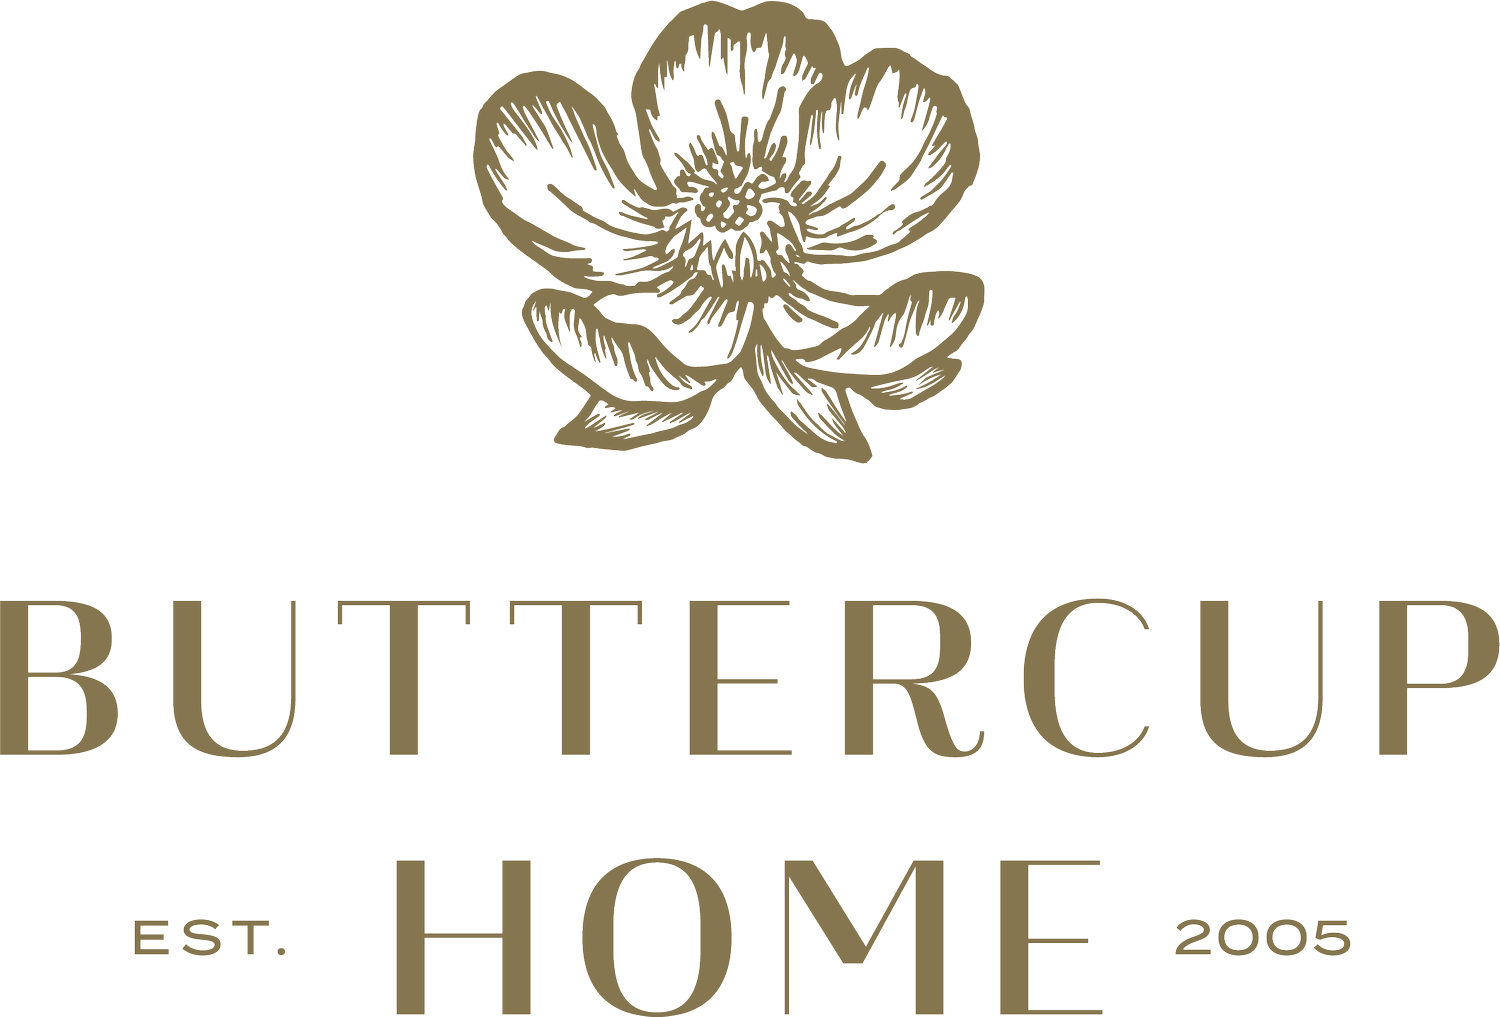 Buttercup Home